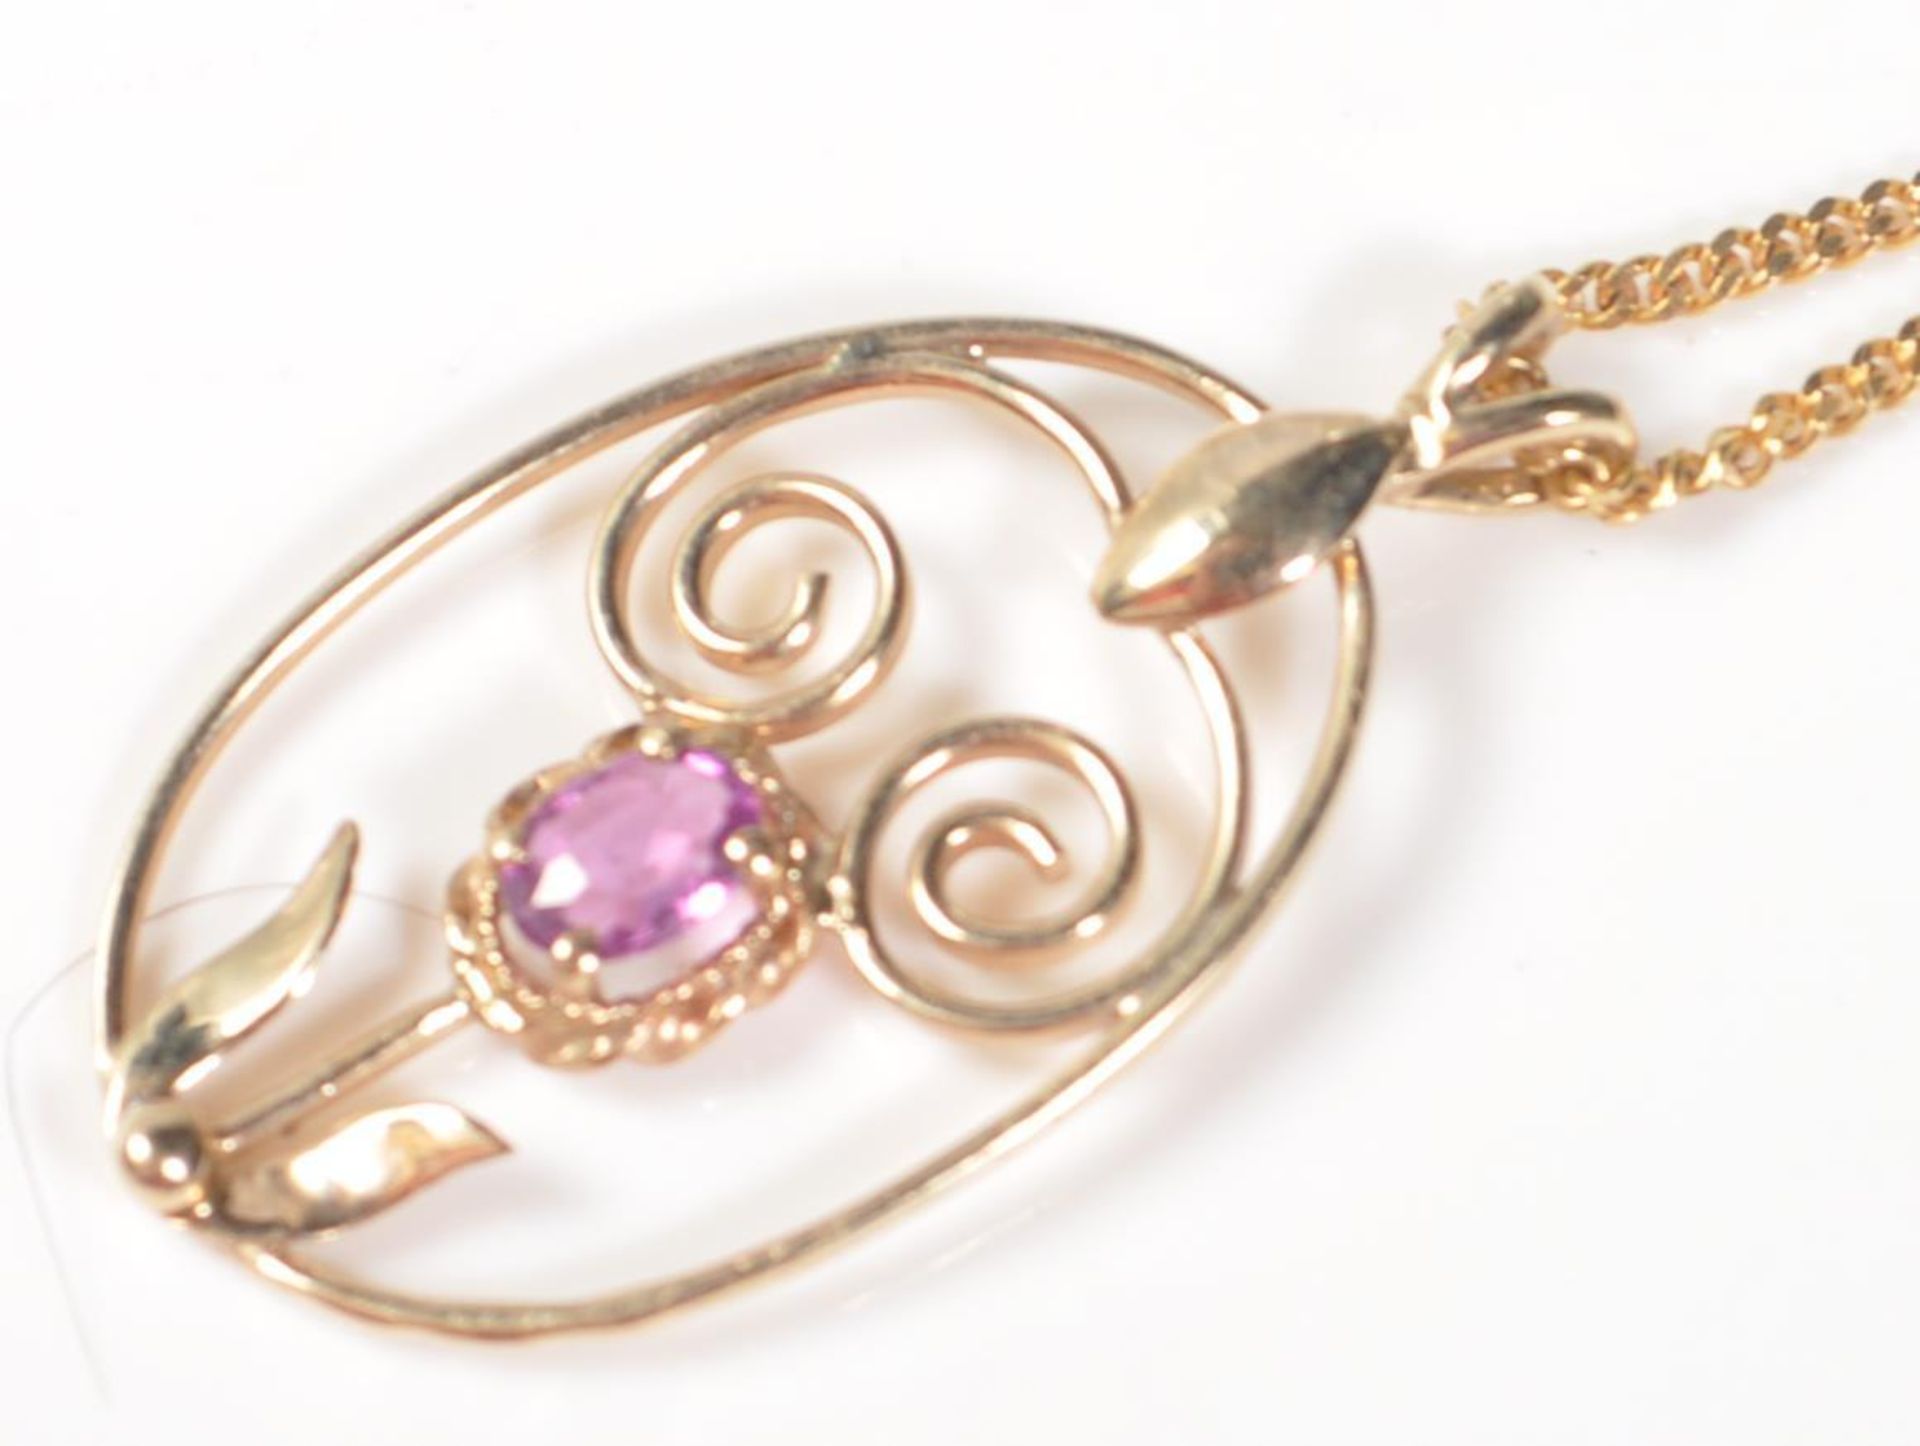 9CT GOLD AND PINK STONE PENDANT NECKLACE - Image 2 of 7